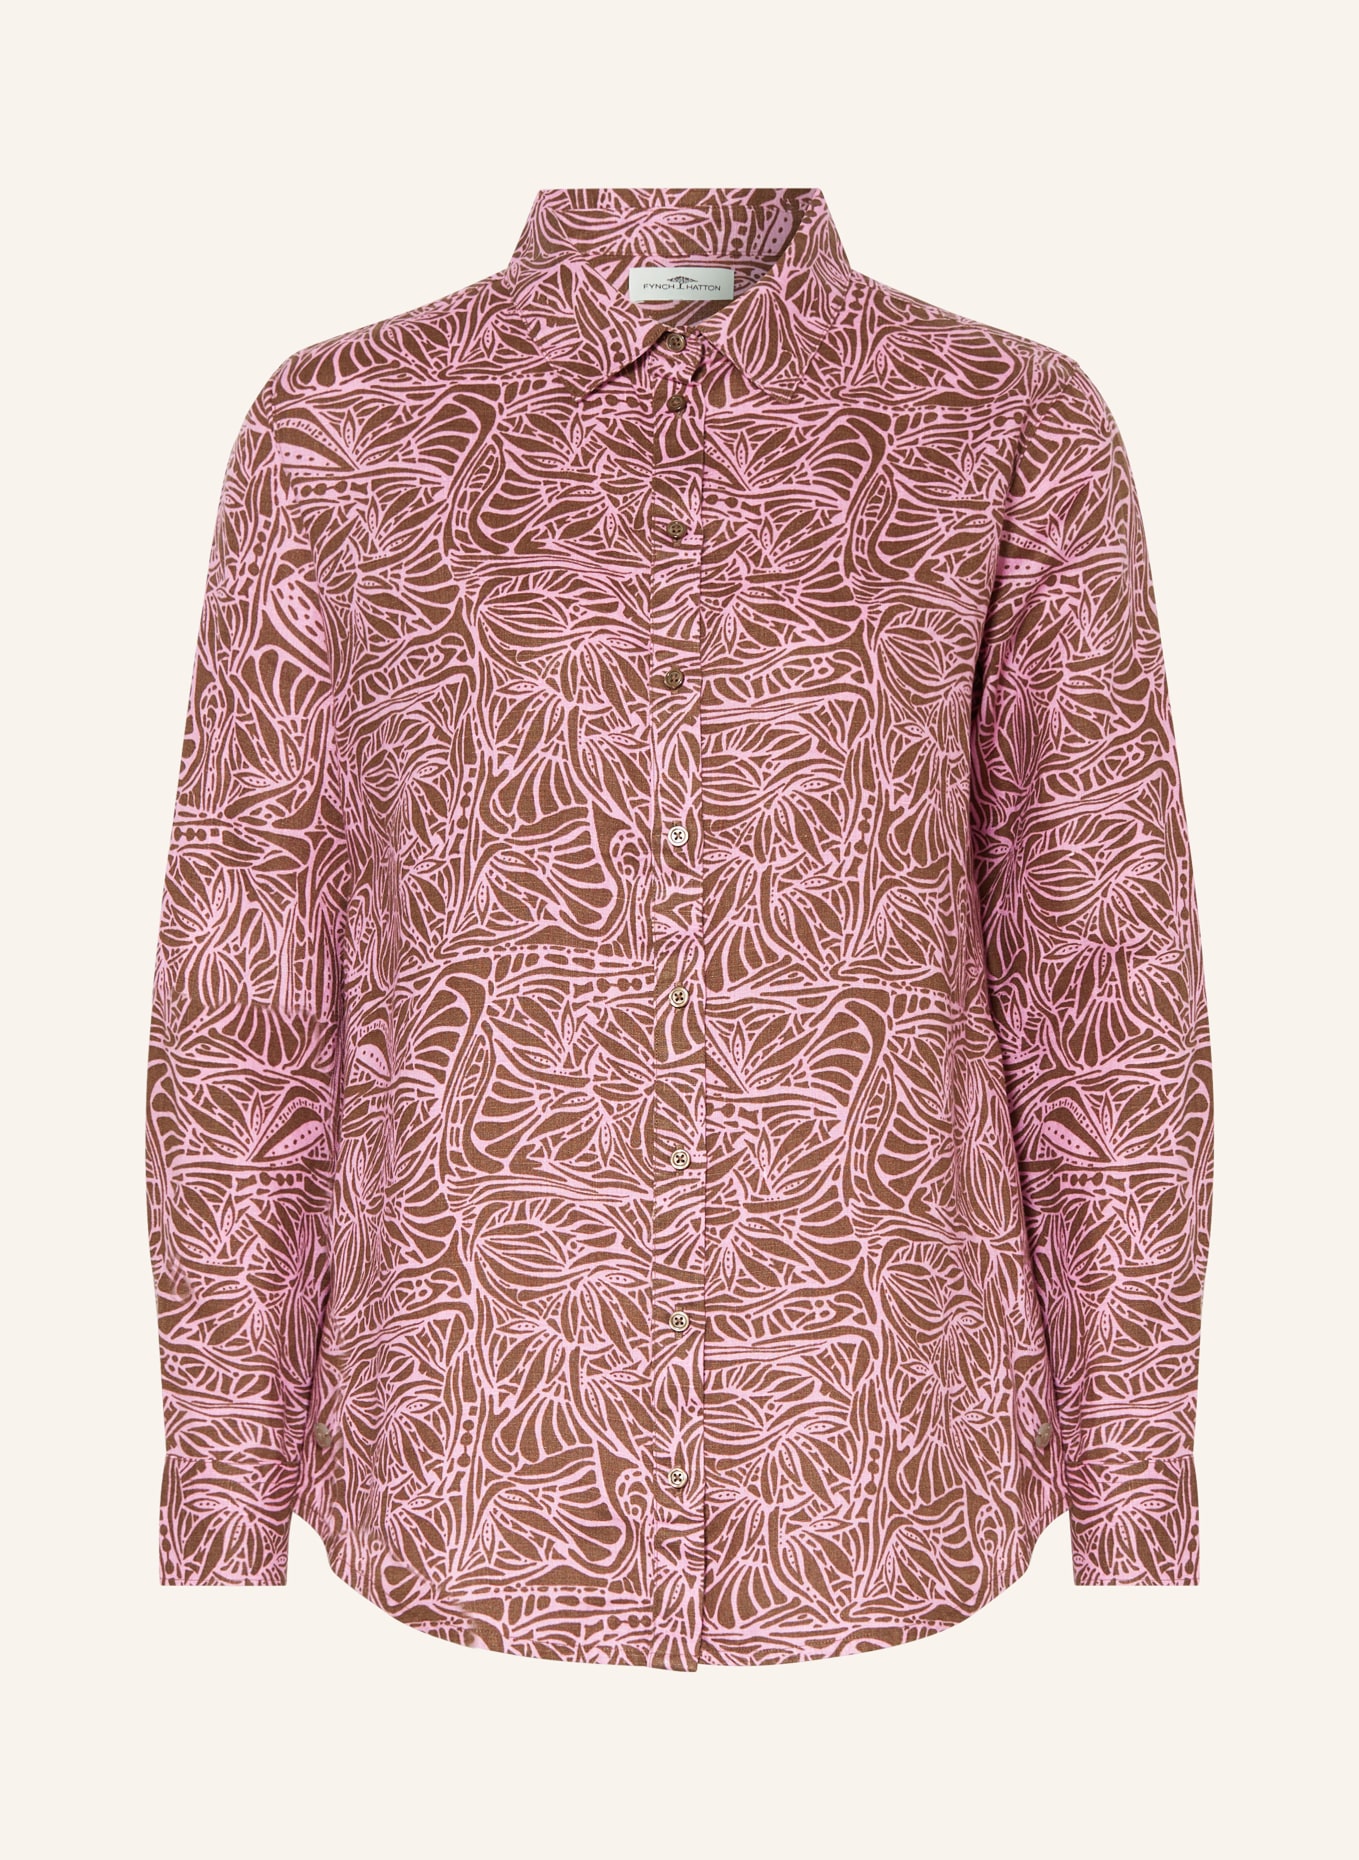 FYNCH-HATTON Shirt blouse made of linen, Color: PINK/ BROWN (Image 1)